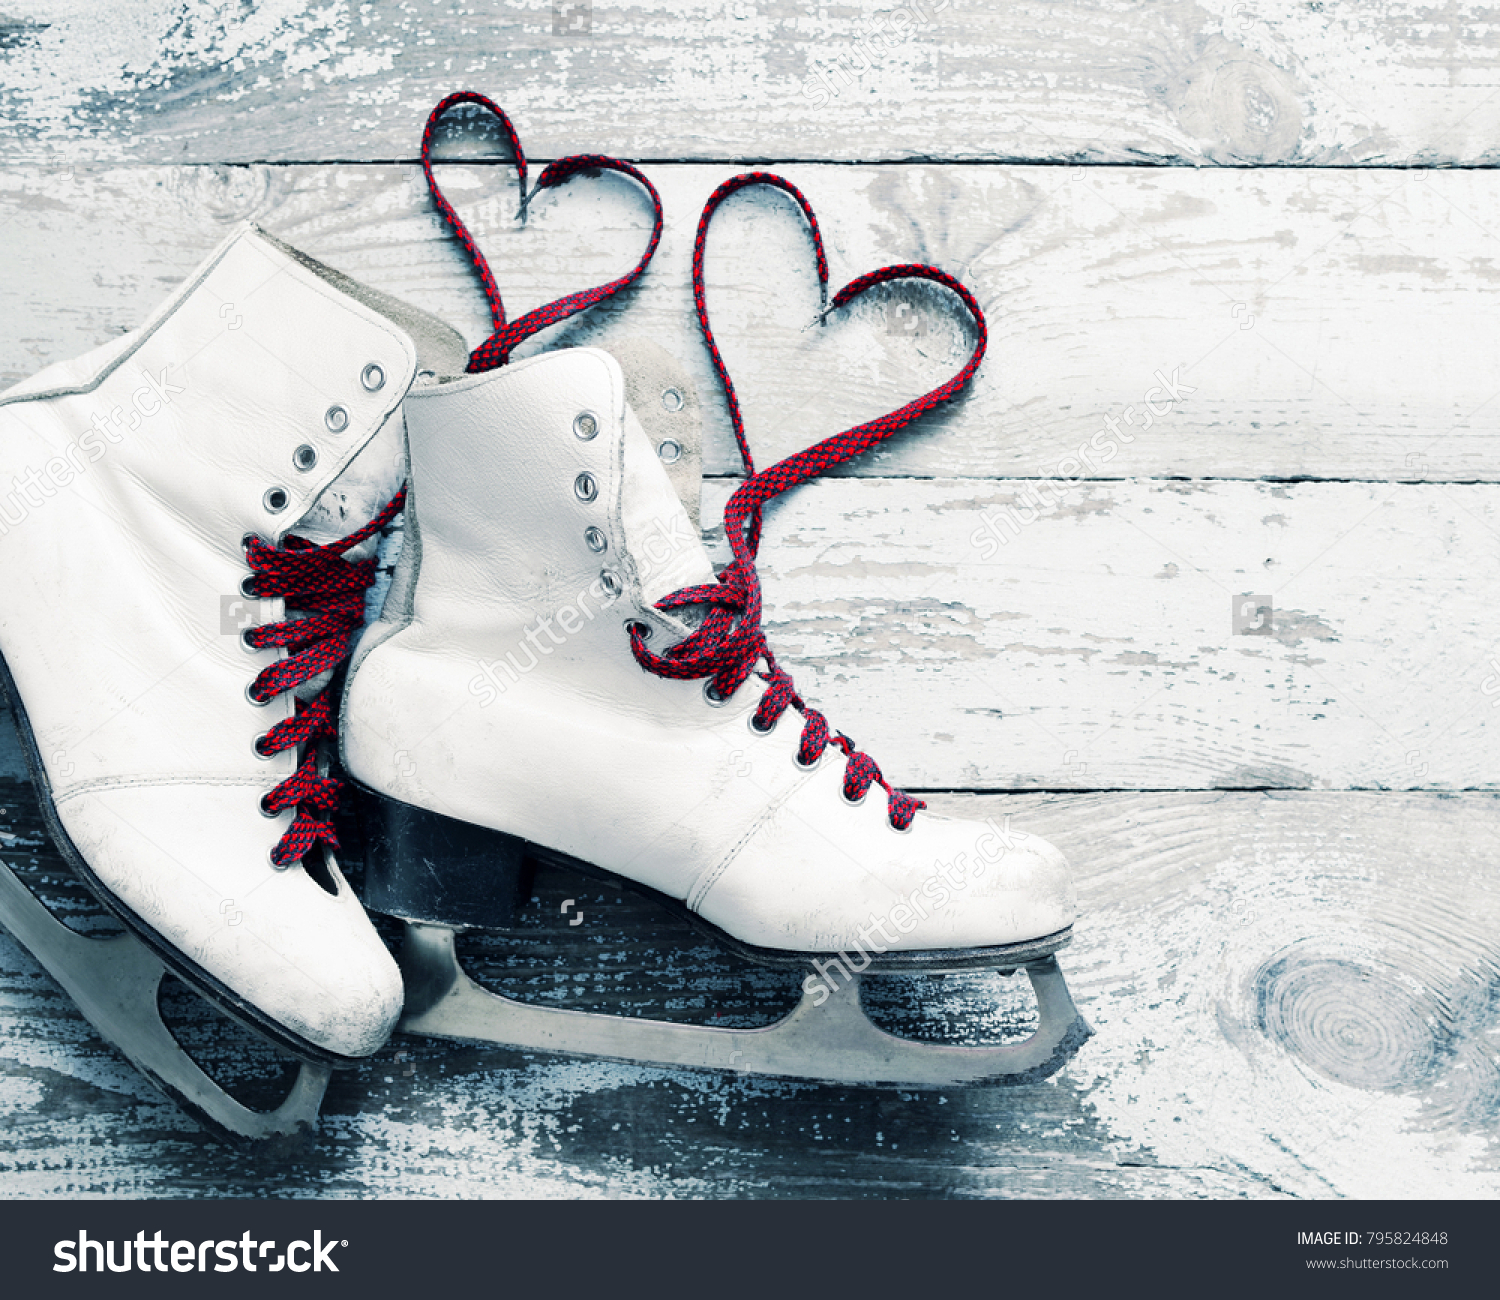 Old white skates for figure skating with a hearts of laces on a vintage wooden surface. Concept of love. #795824848